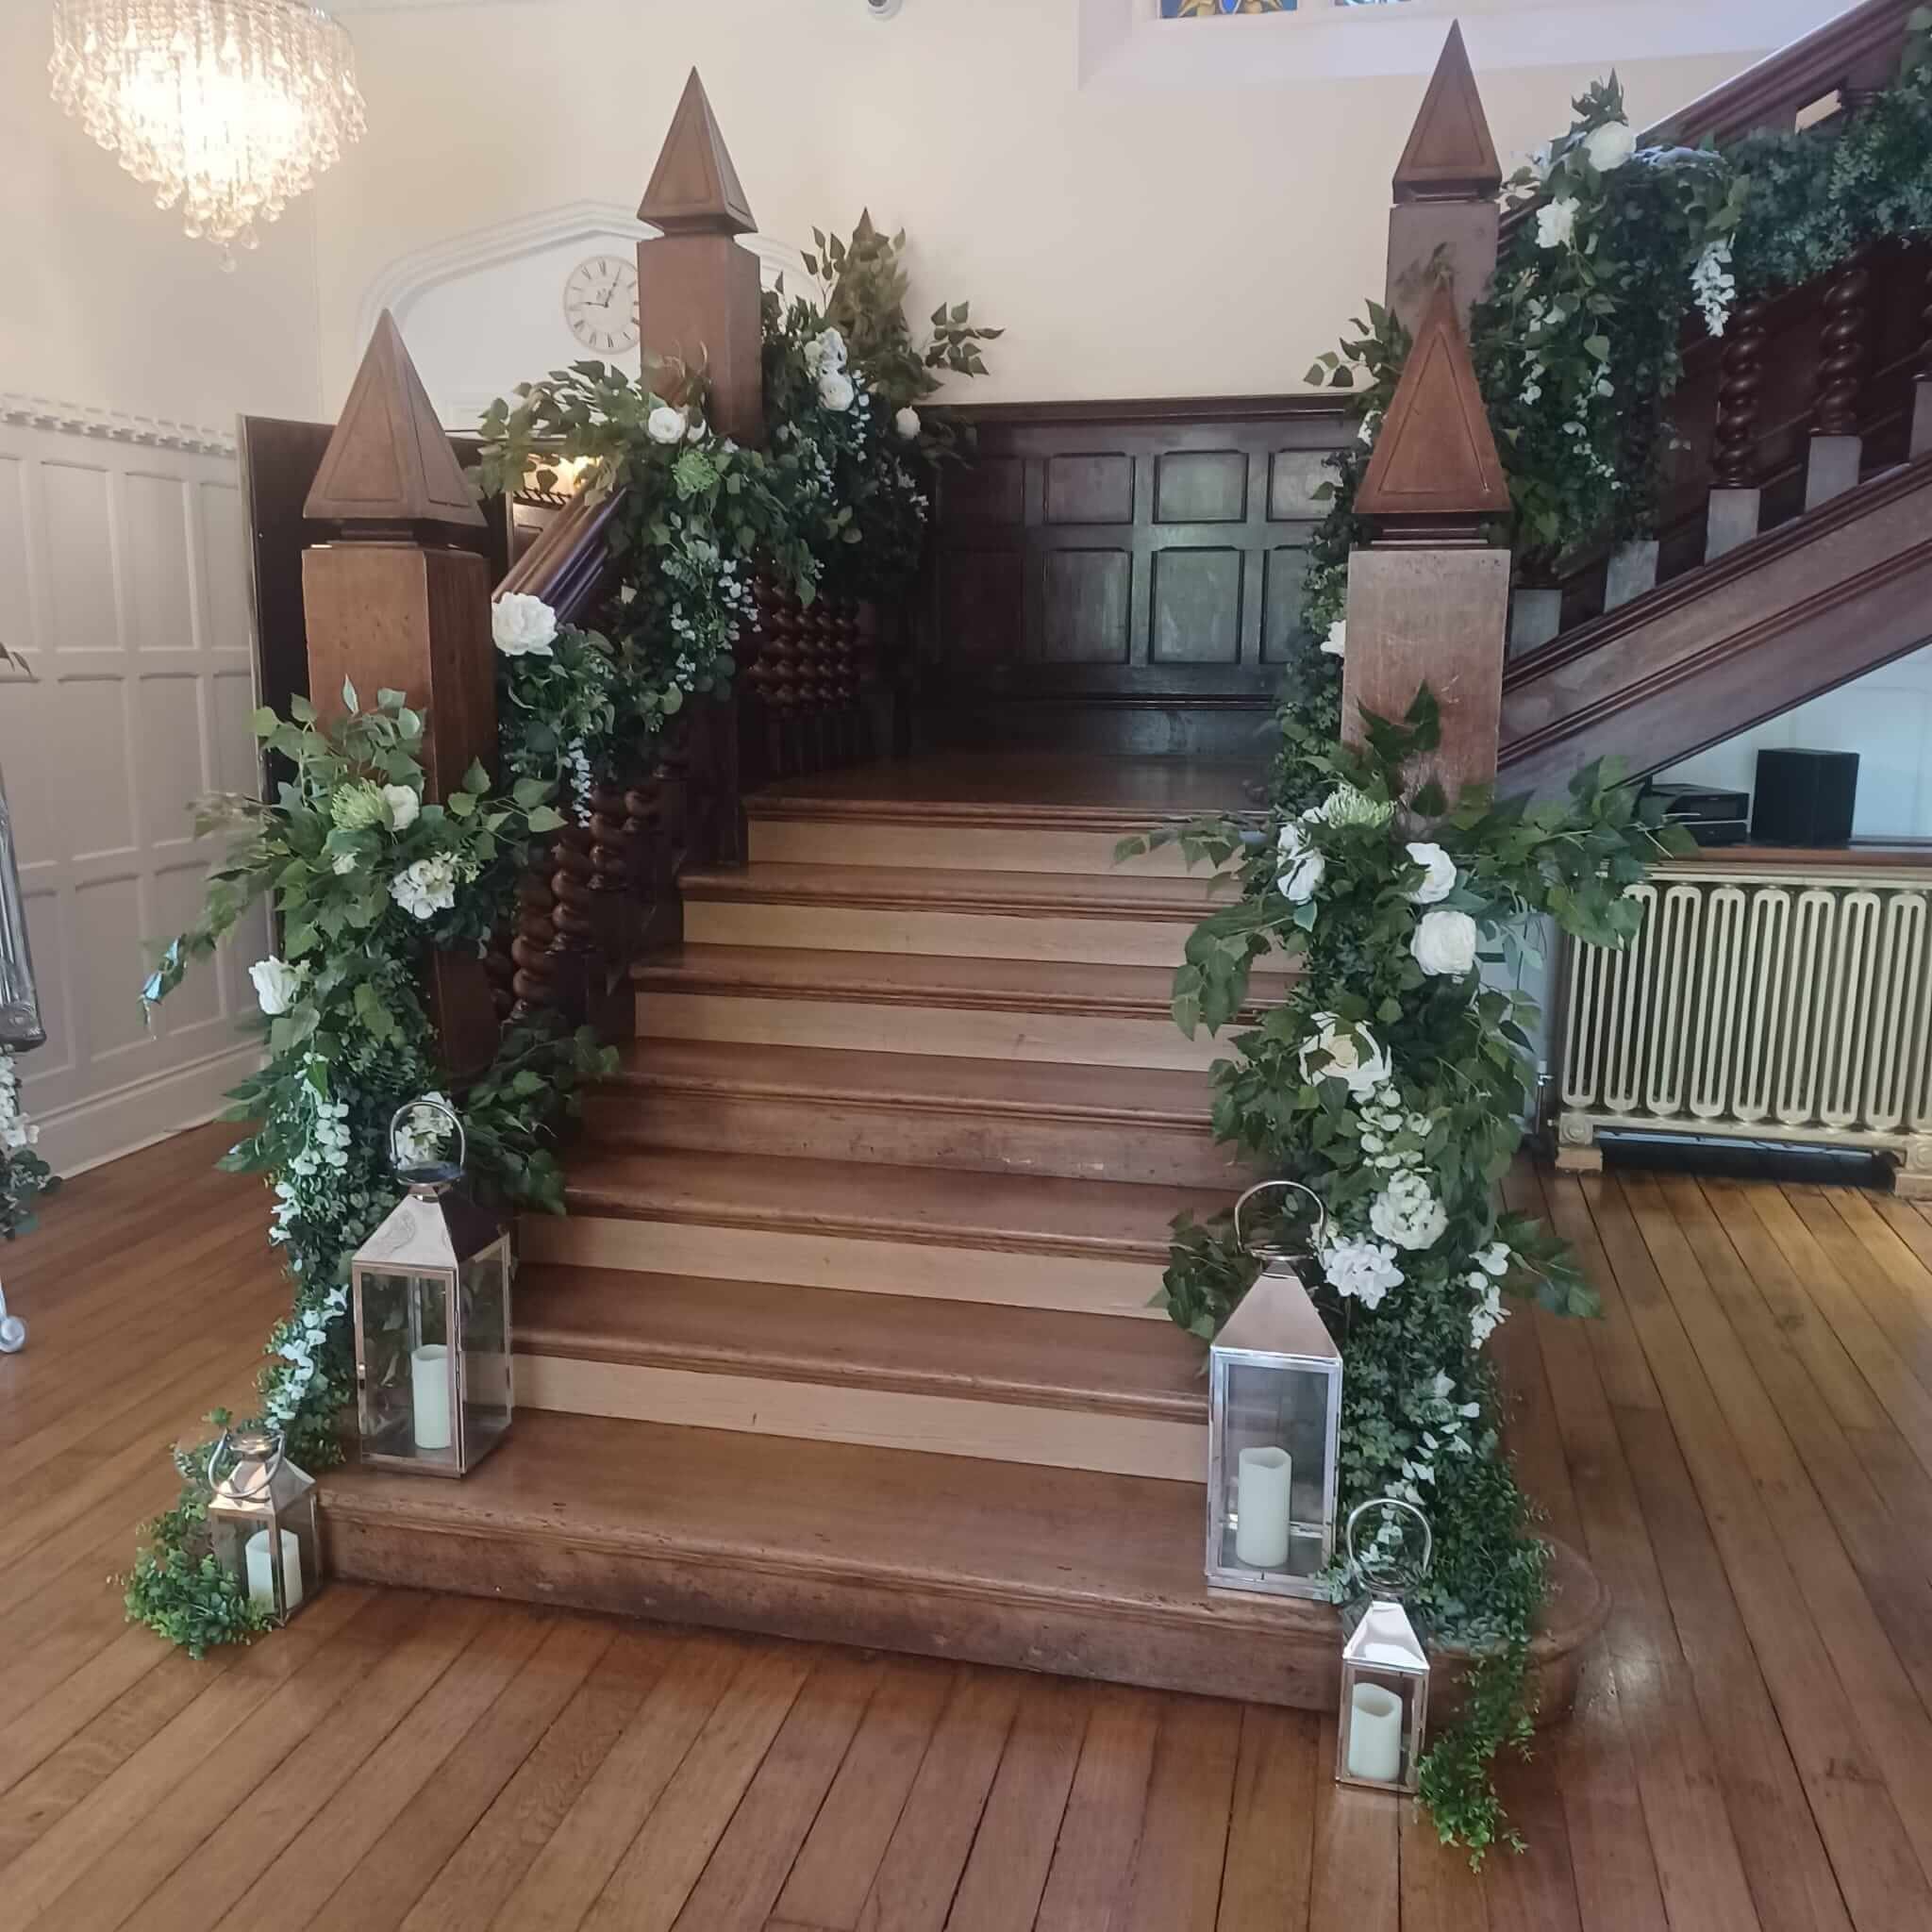 Wedding_Decor_fauxflorals_highleymanor_staircase.jpg